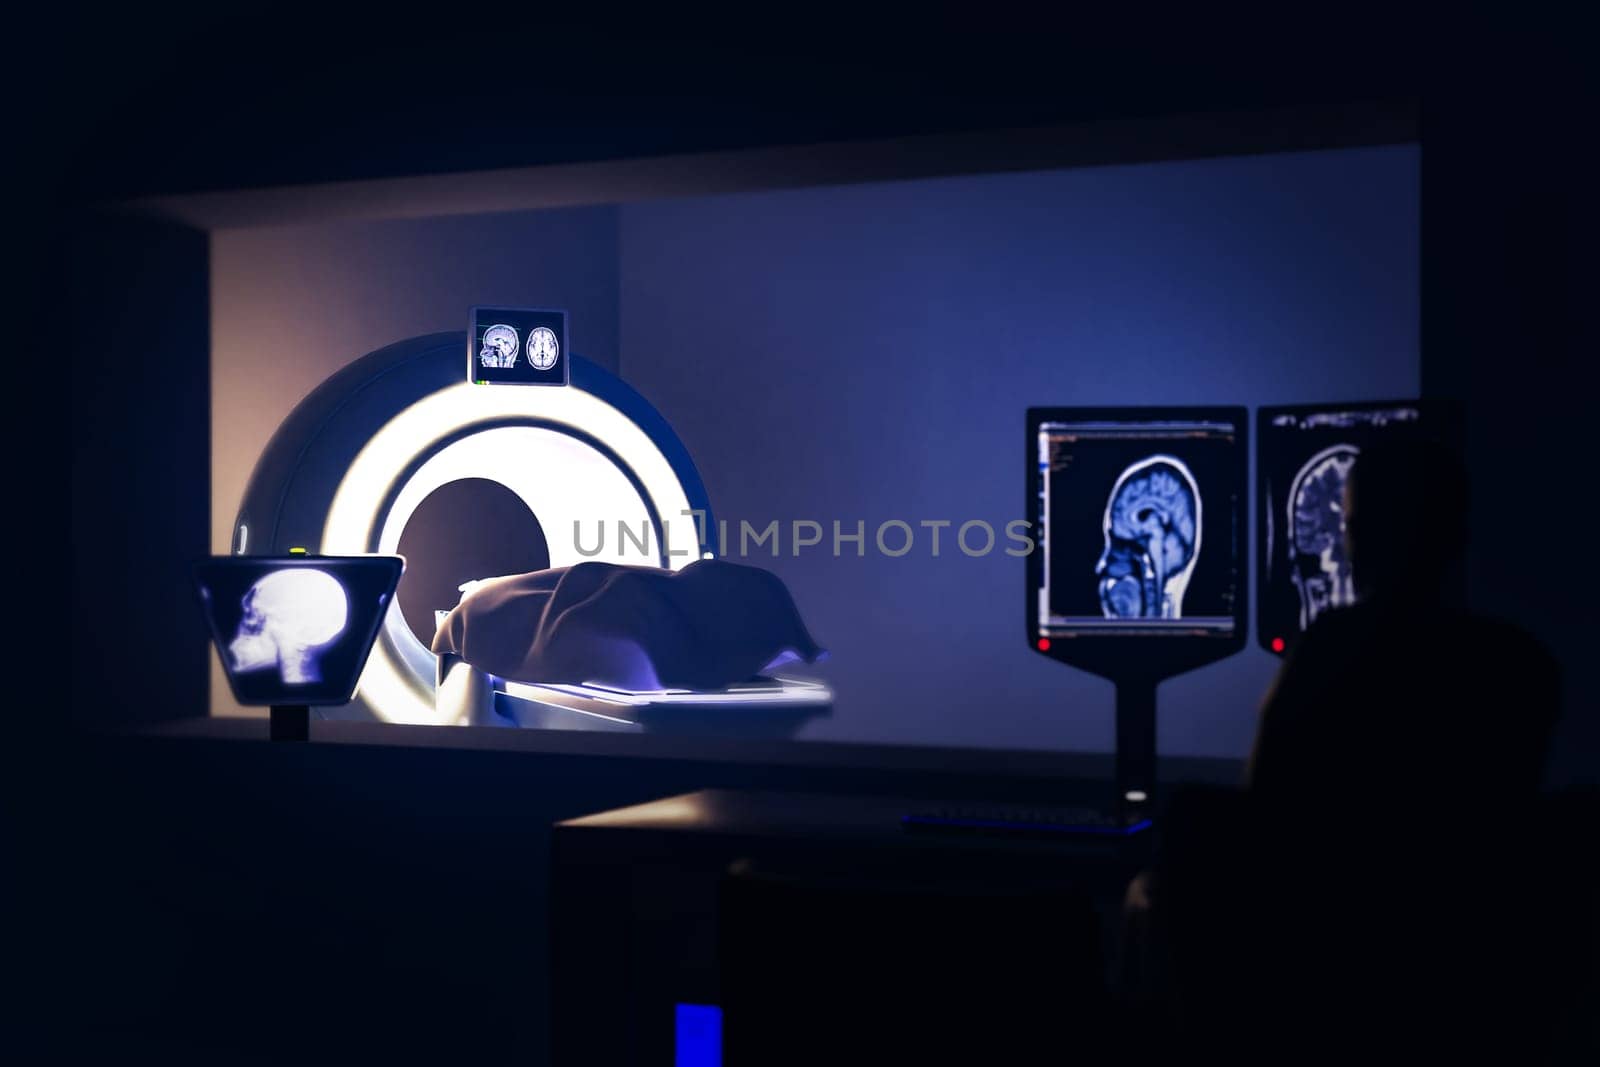 In Control Room Radiologist Diagnosis while Watching Procedure and Monitors Showing Brain Scans Results, In the Background Patient Undergoes MRI or CT Scan Procedure.3D rendering . by samunella